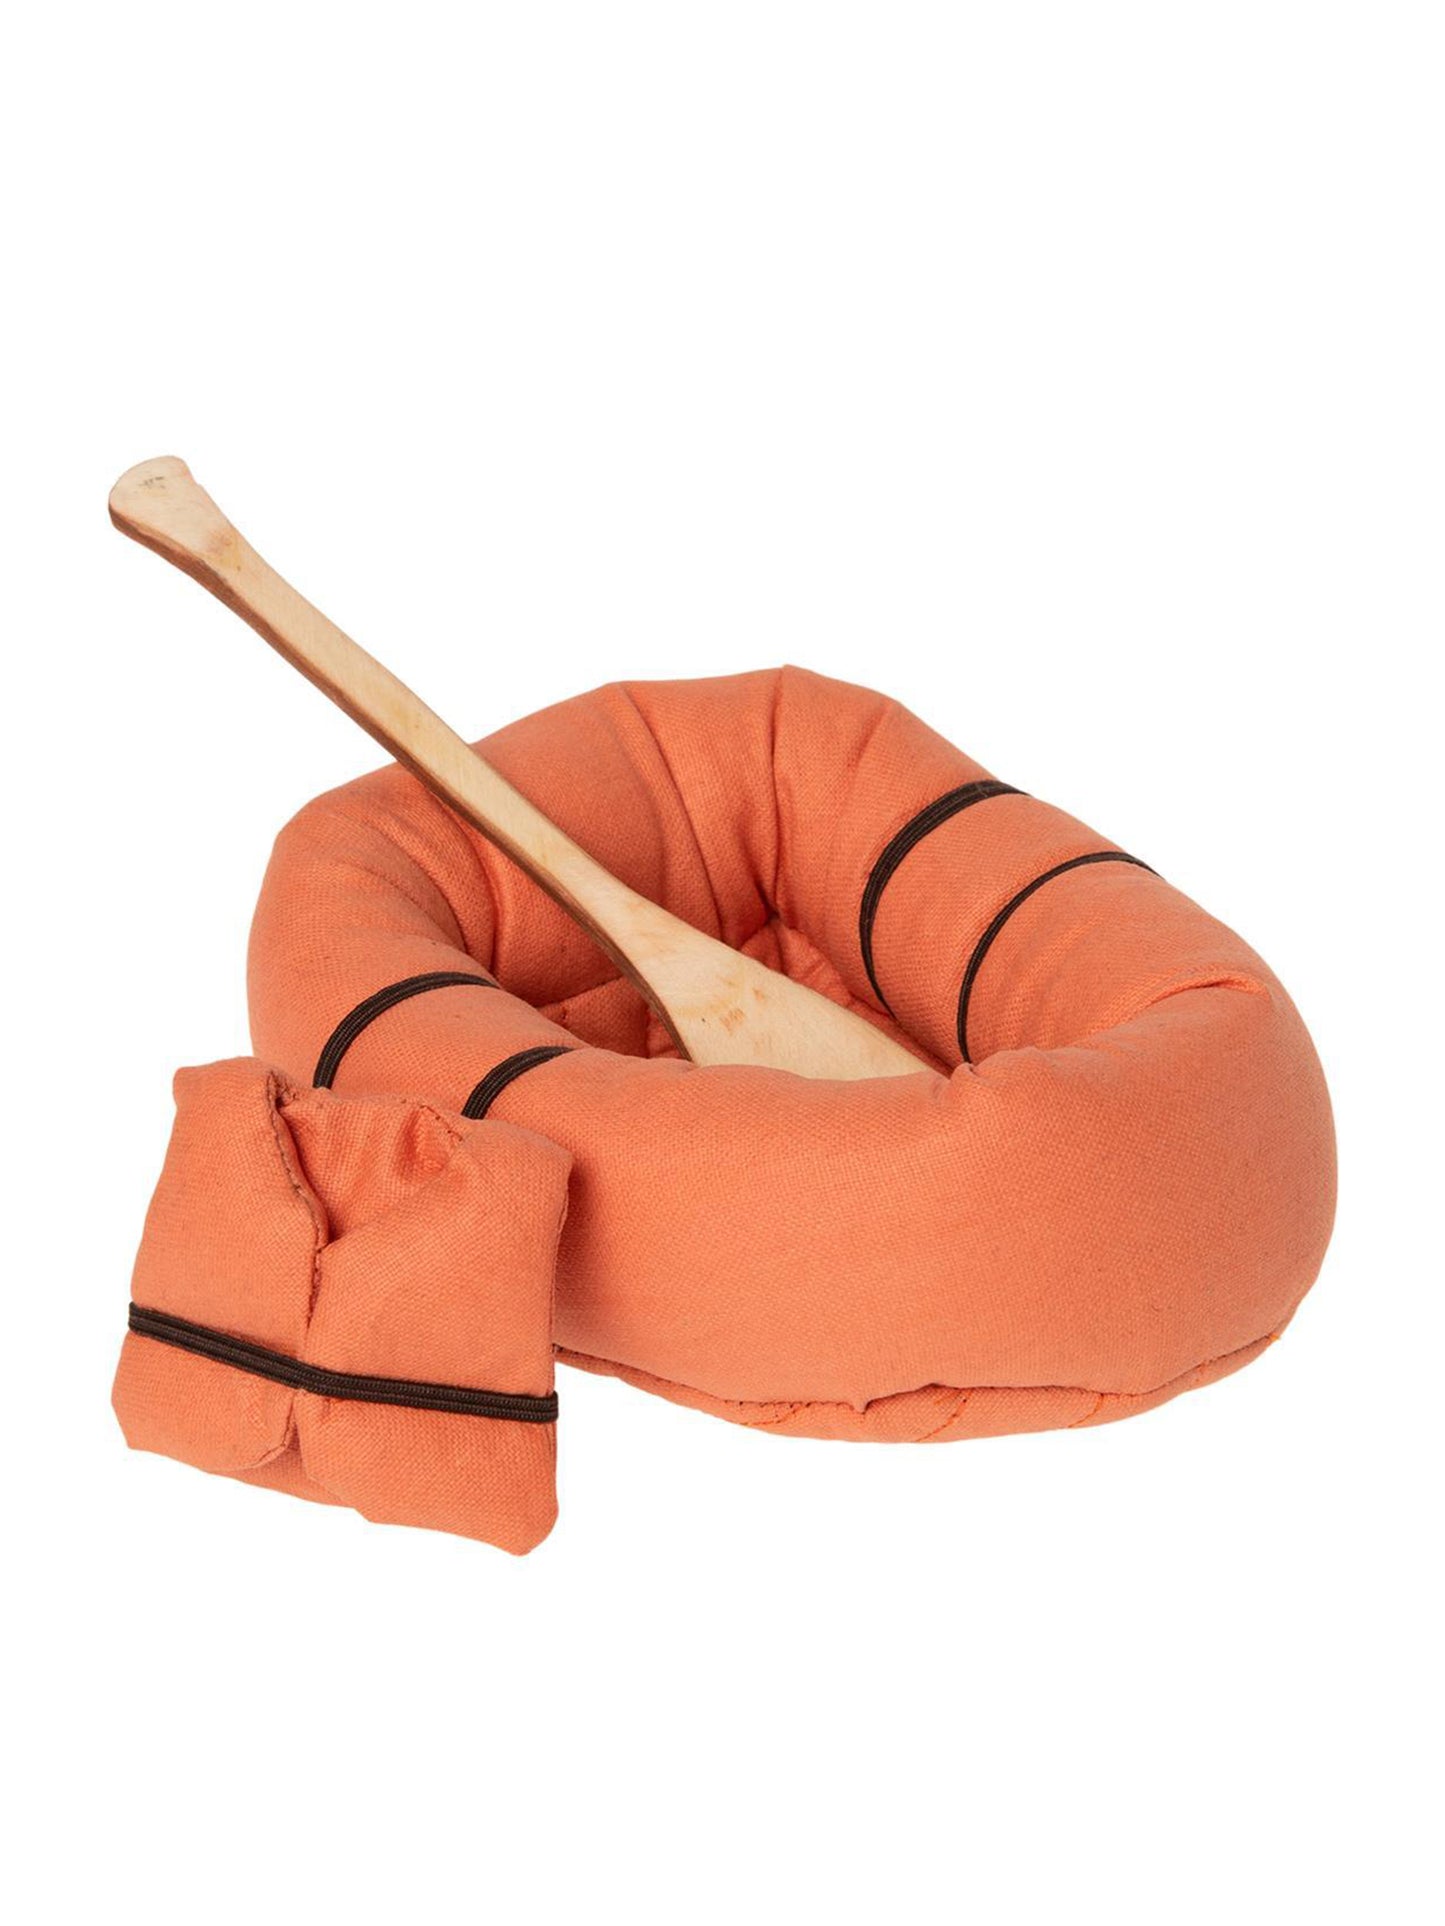 Maileg Rubber Boat Weston Table